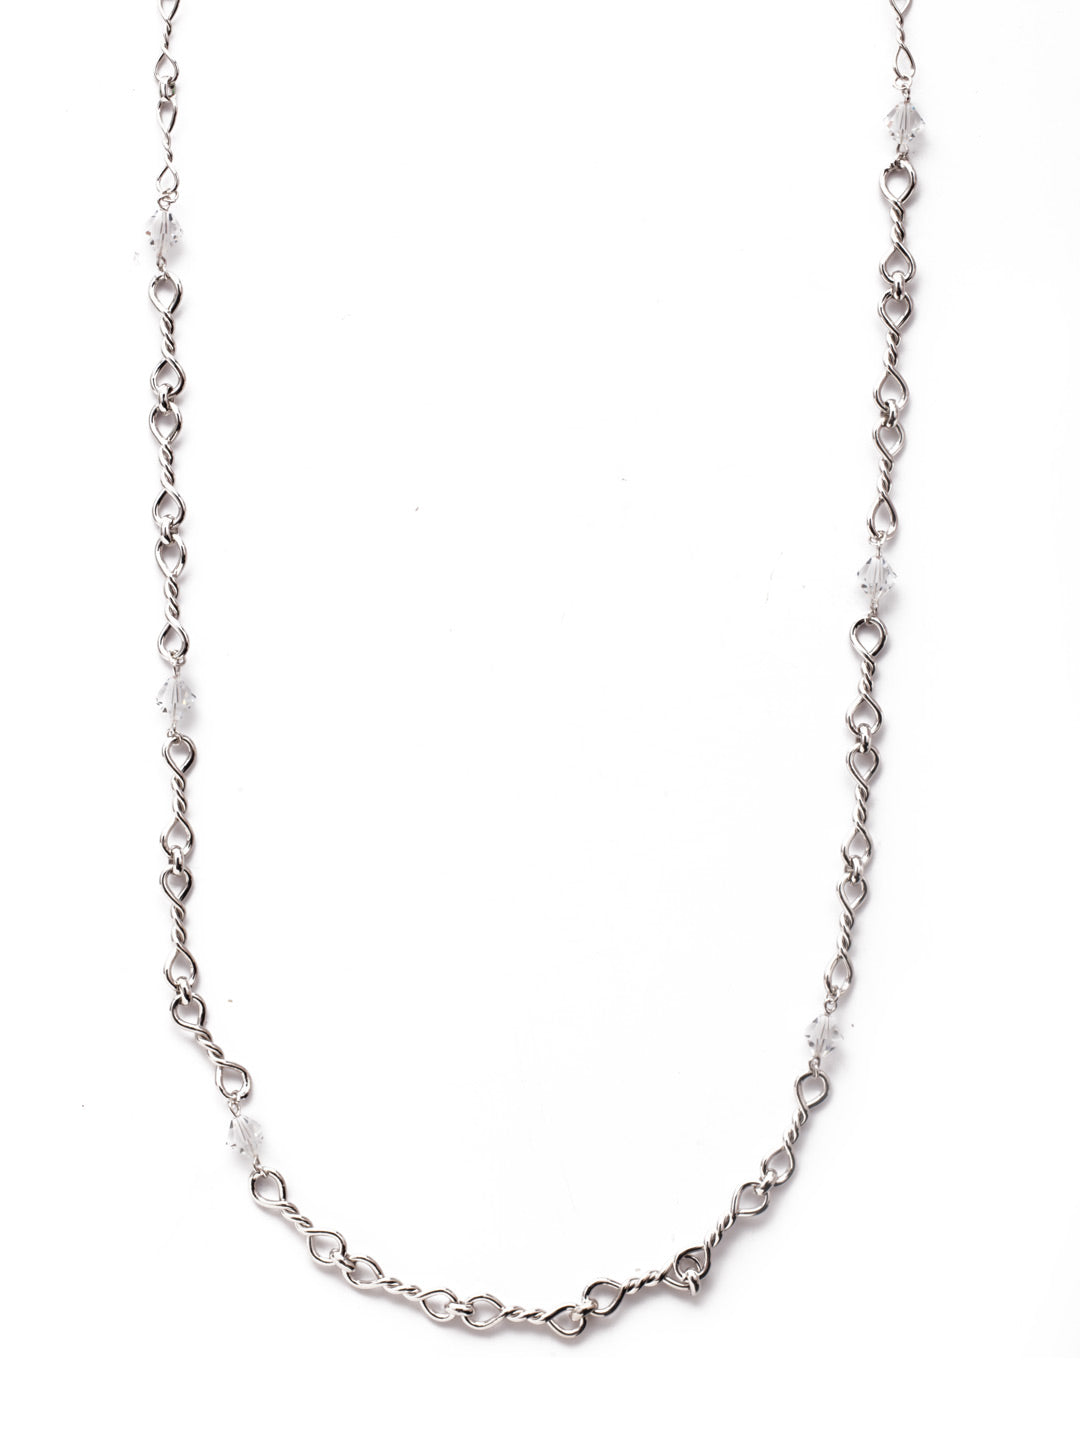 Ambretta Long Necklace - 4NES15RHCRY - <p>The Ambretta Long Necklace is perfect for layering professionals and novices, alike. Add it to your collection for its simply stunning metal twist detail and its shiny clear gems that reflect light in all the right ways. From Sorrelli's Crystal collection in our Palladium Silver-tone finish.</p>